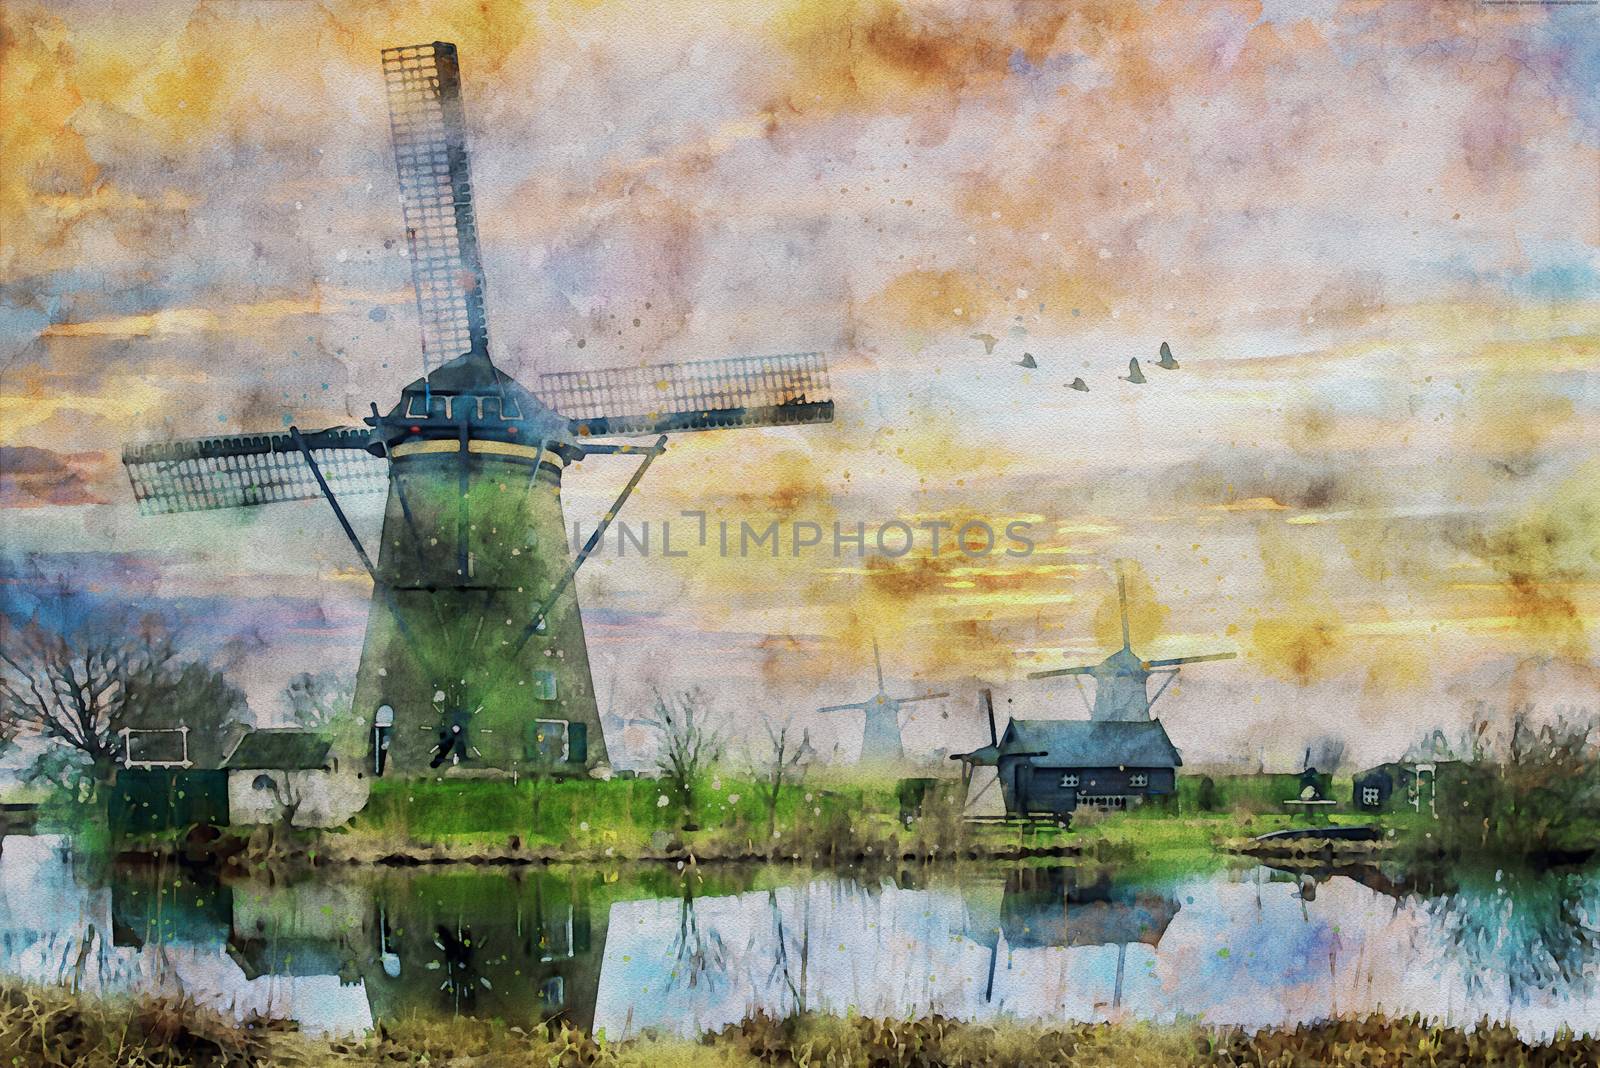 Watercolor painting of a group of geese flying above the Dutch windmills during the sunset moment by ankorlight